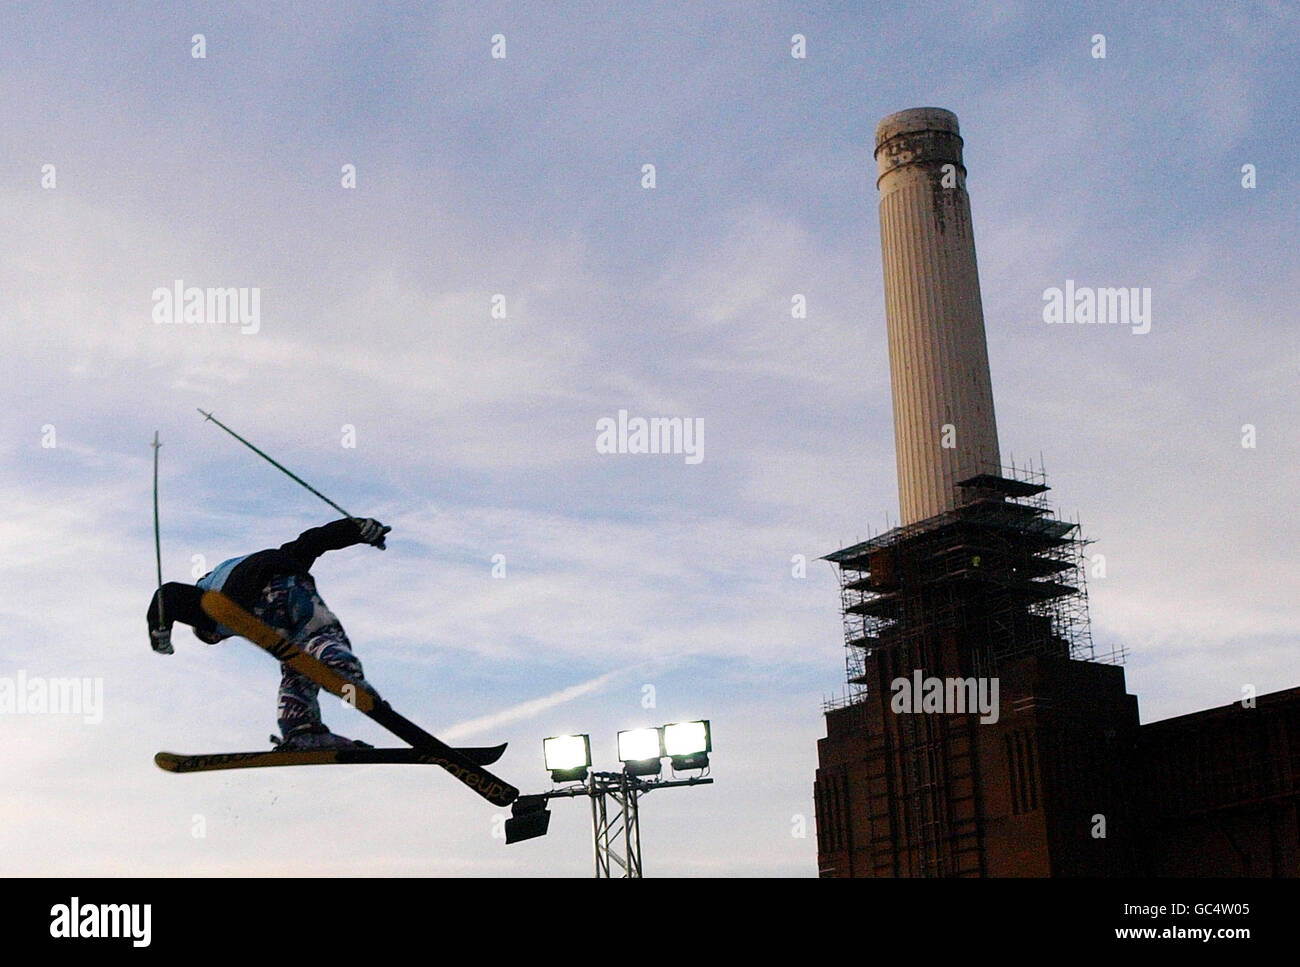 A freeskier goes past London's Battersea Power Station during their freeski practise at London Freeze weekend. Stock Photo